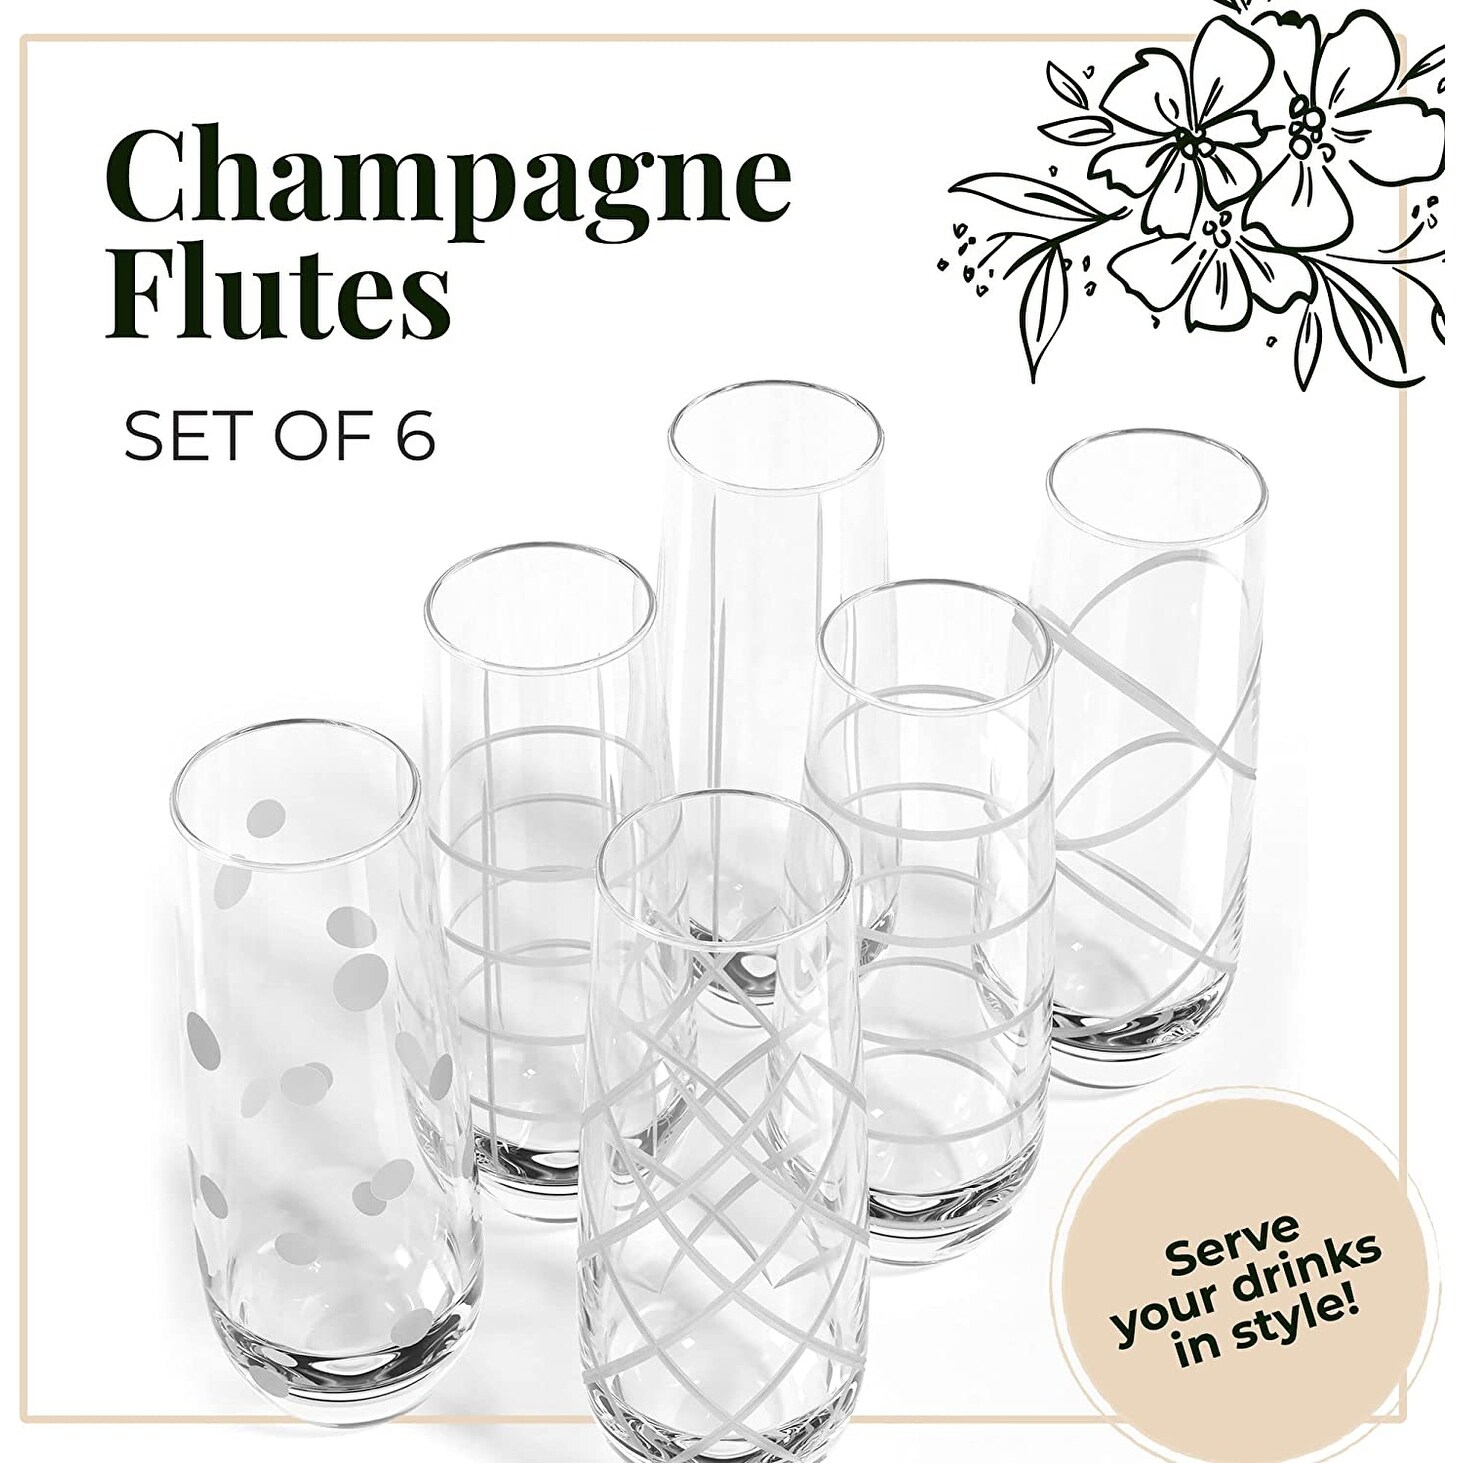 https://ak1.ostkcdn.com/images/products/is/images/direct/c0506e88ce2d8f96d1895c7be27f3d026887fd53/Fifth-Avenue-Crystal-Medallion-Stemless-Champagne-Flutes-Set-of-6.jpg